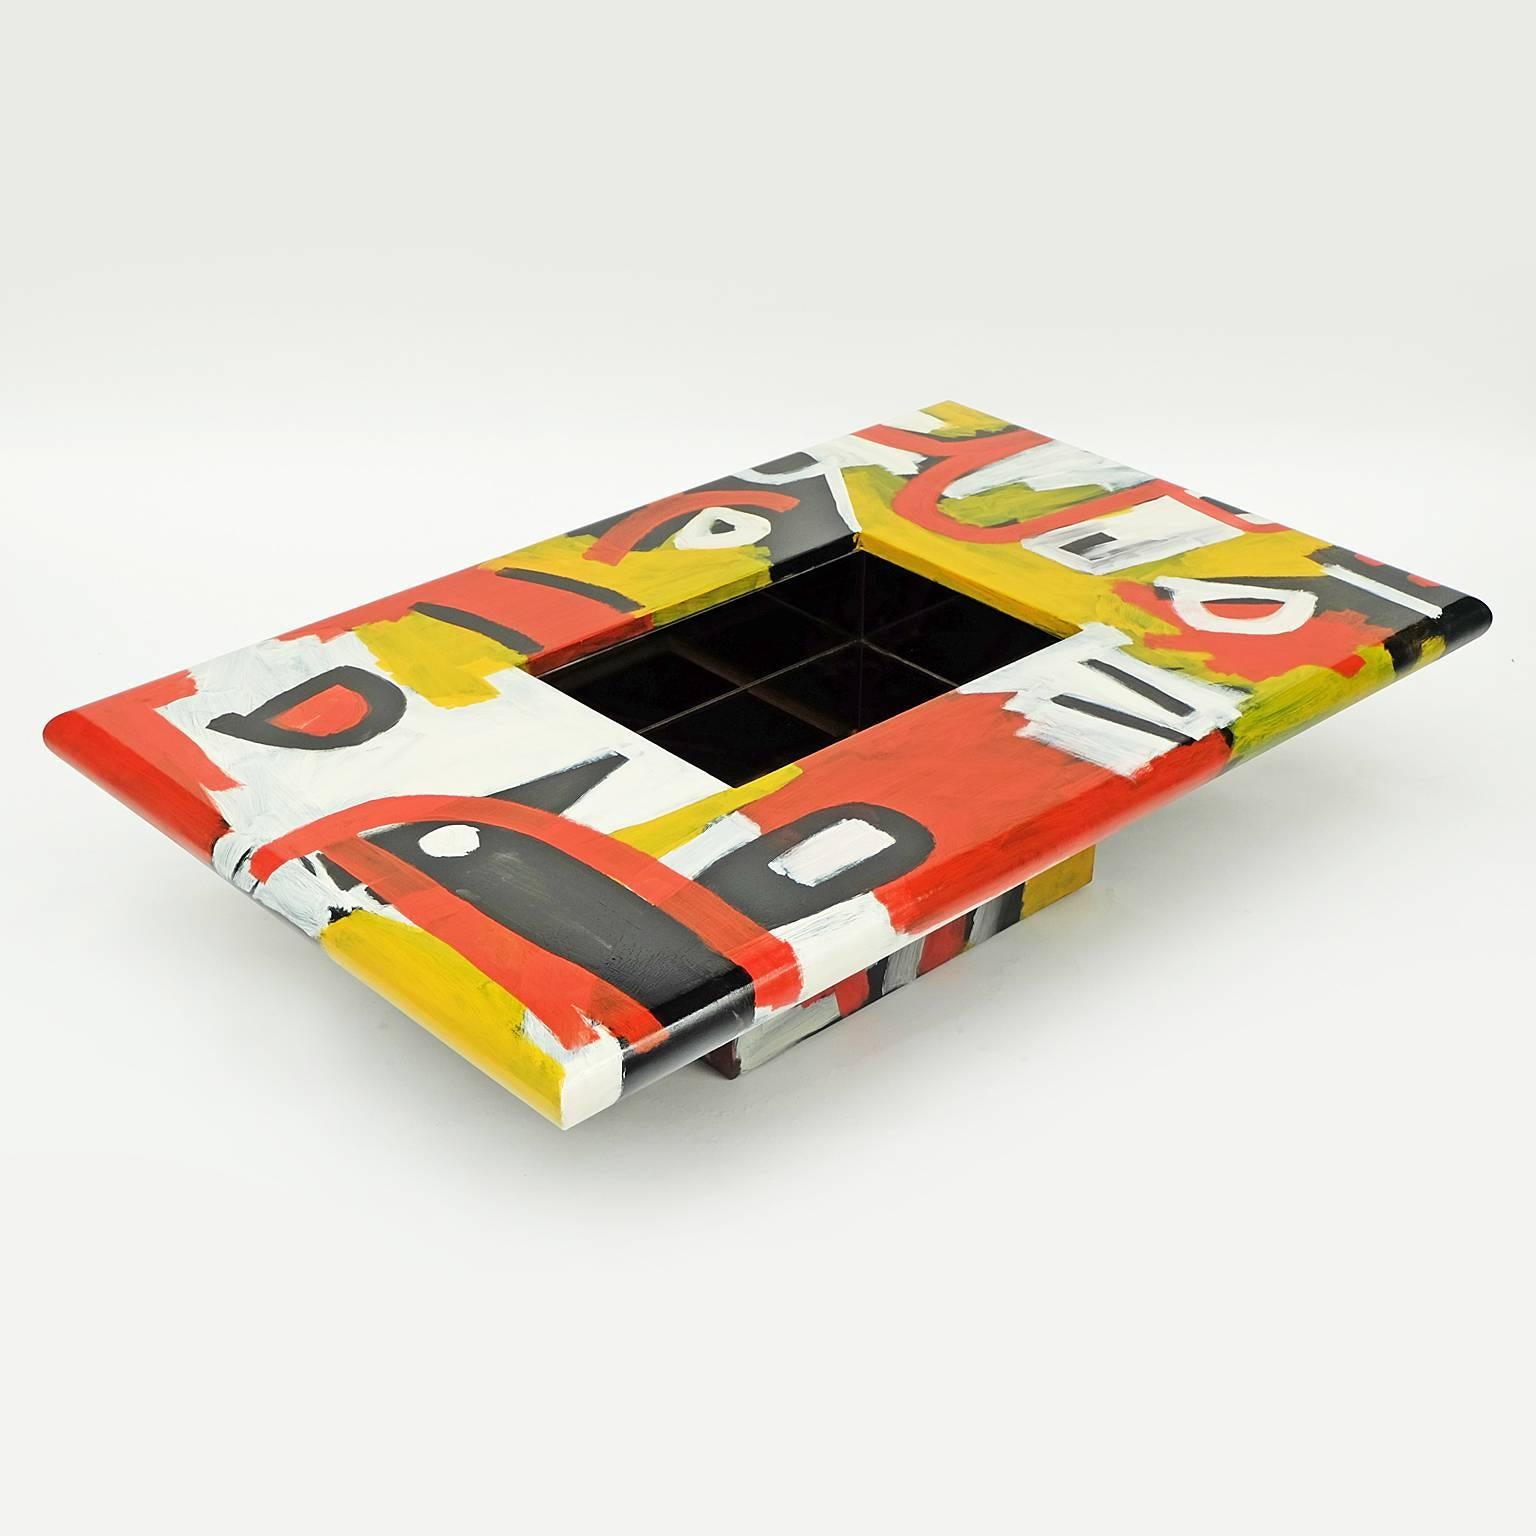 The studio coffee table is a bespoke piece created by the artist Alan Fears. 

The table features a hand painted freeform tribal design.
Central tinted mirror storage. 

Measures: H 33cm x L 137cm x W 87cm.